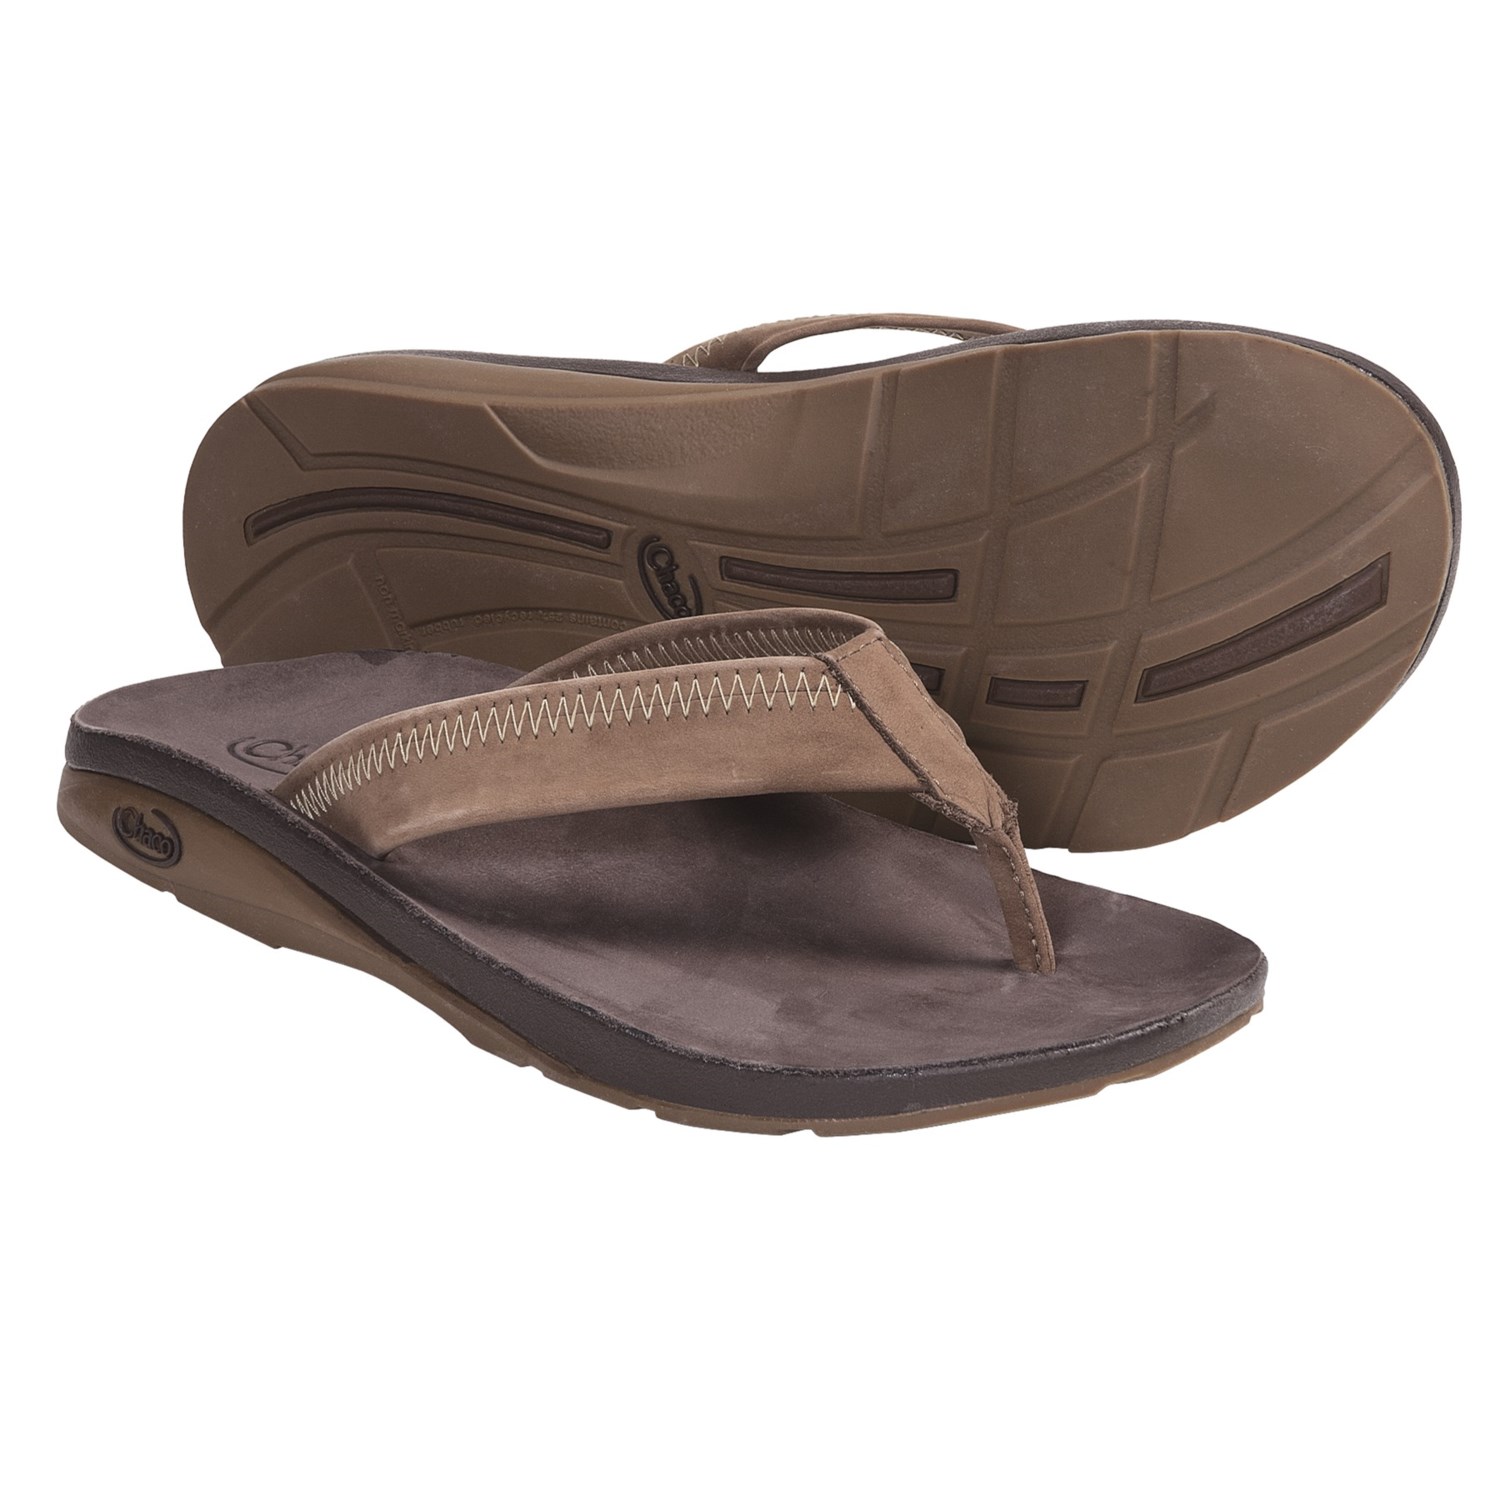 Chaco Flippin Chill Ecotread Thong Sandals - Flip-Flops, Recycled ...